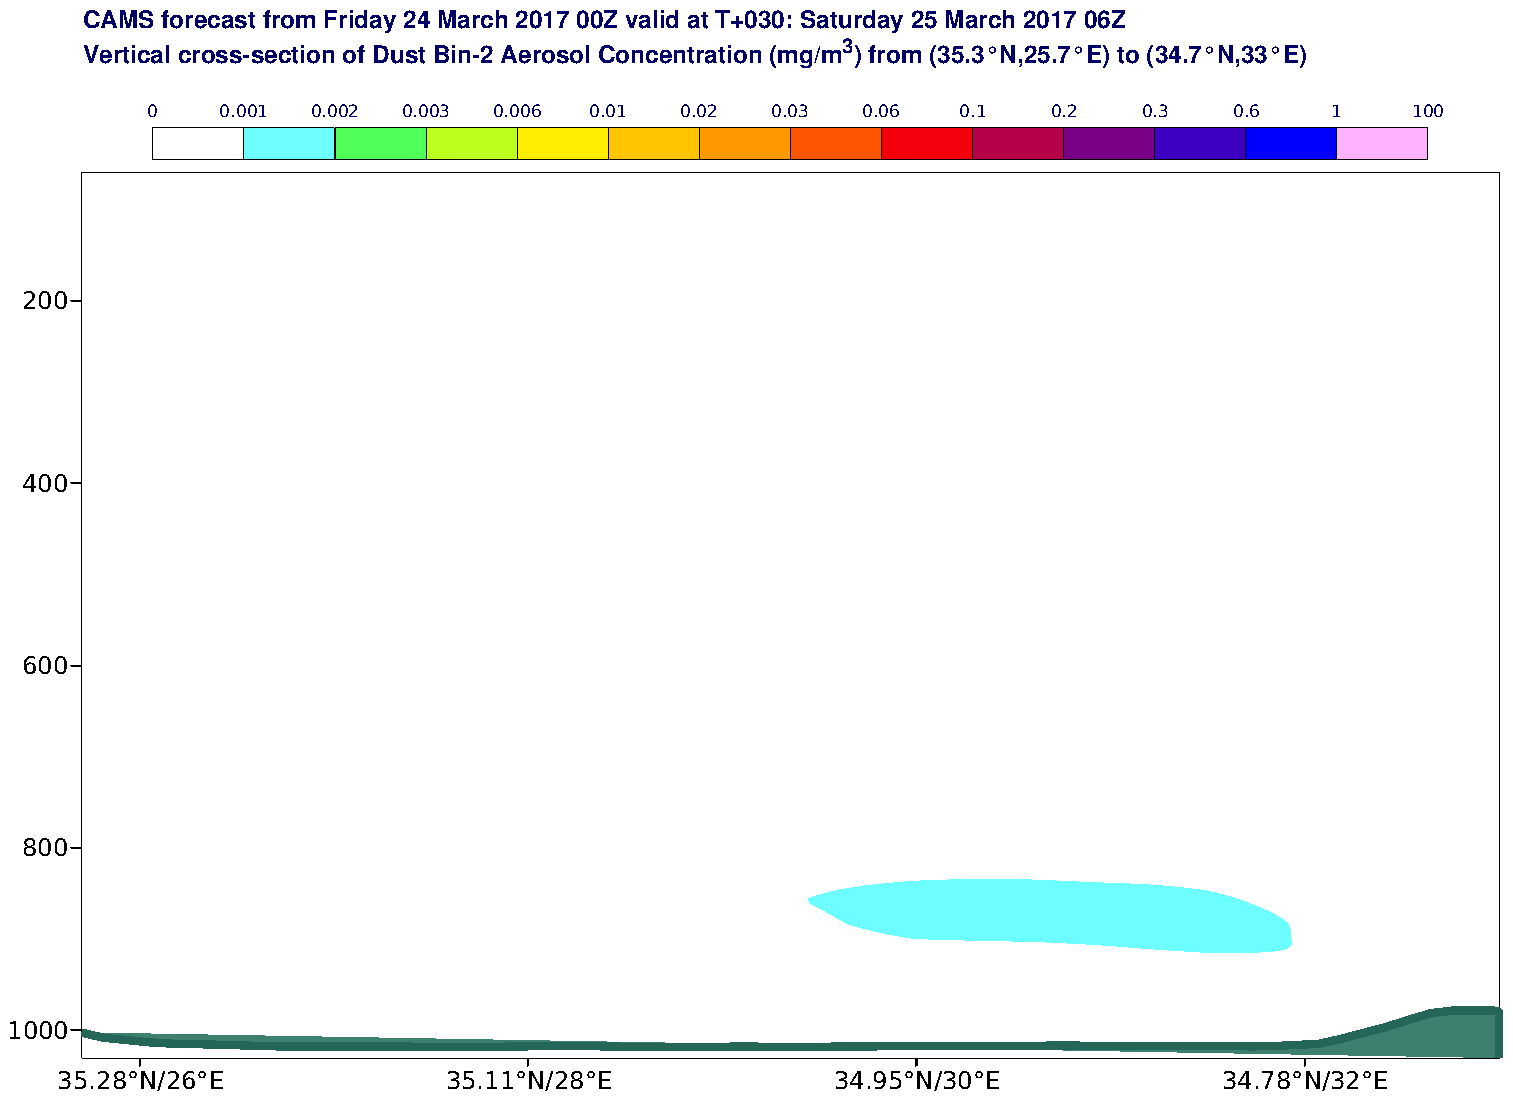 Vertical cross-section of Dust Bin-2 Aerosol Concentration (mg/m3) valid at T30 - 2017-03-25 06:00